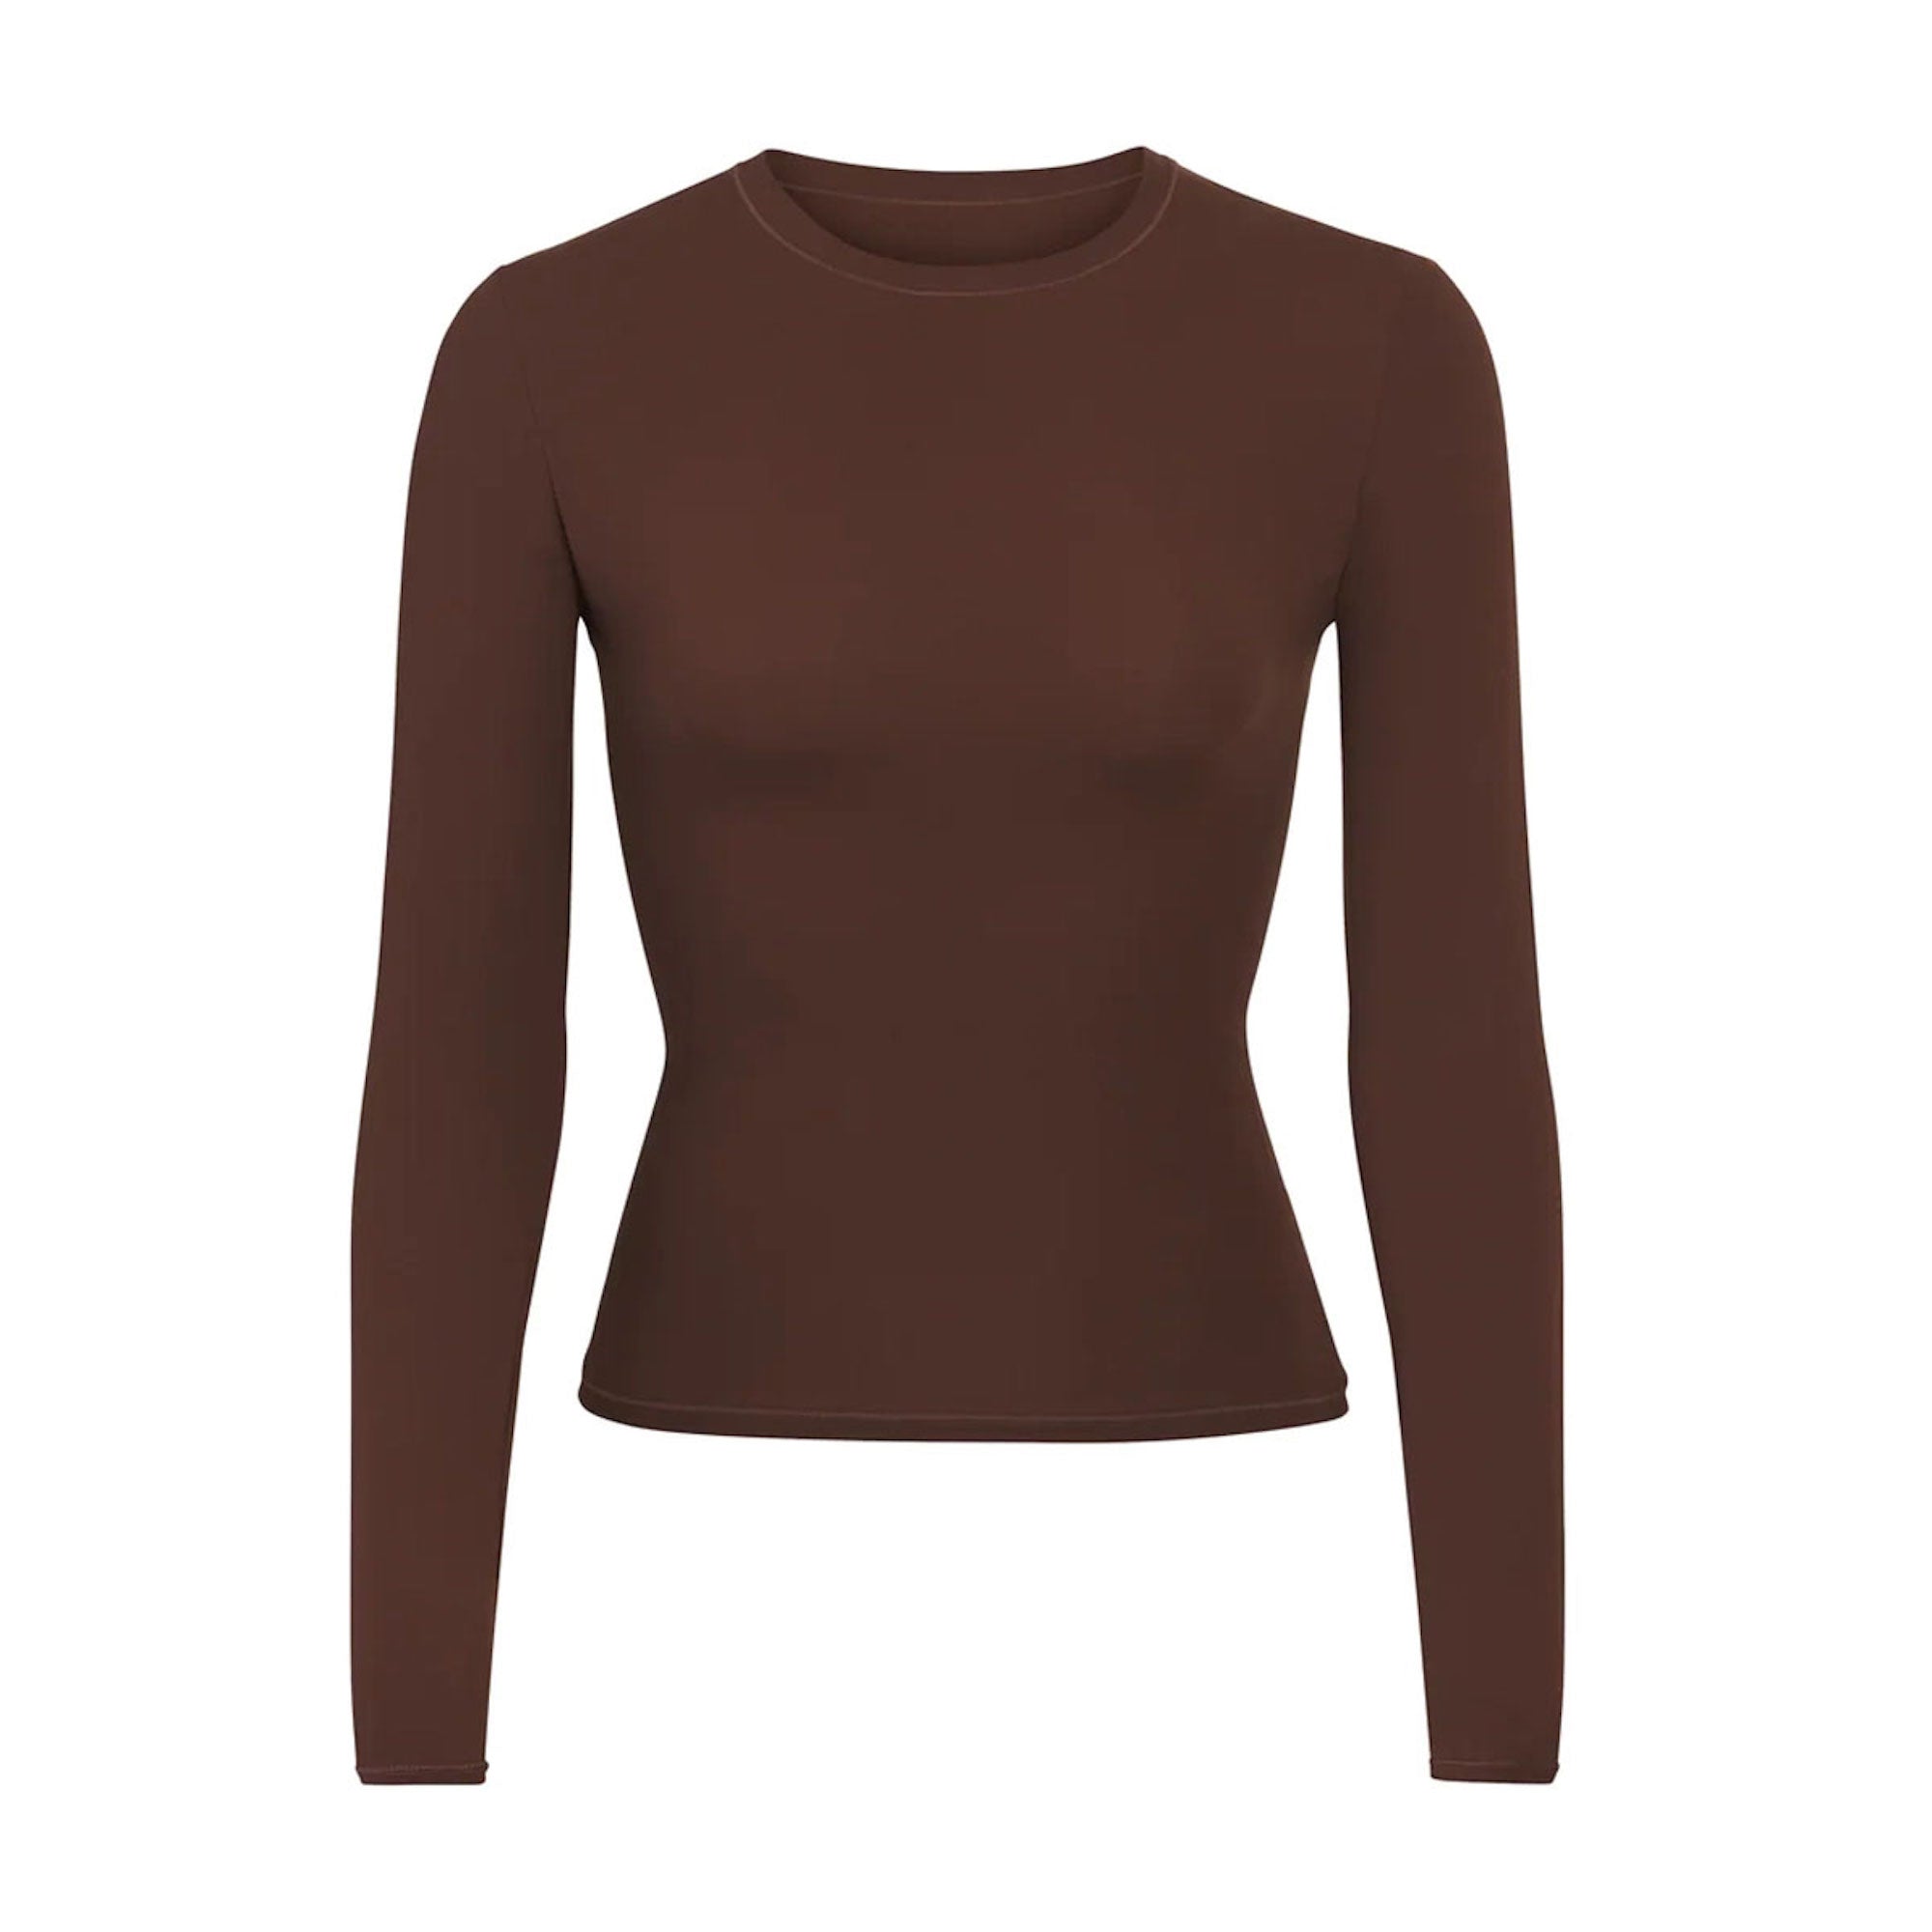 New Vintage Cropped Raglan T Shirt - Cocoa - 3X is in stock at